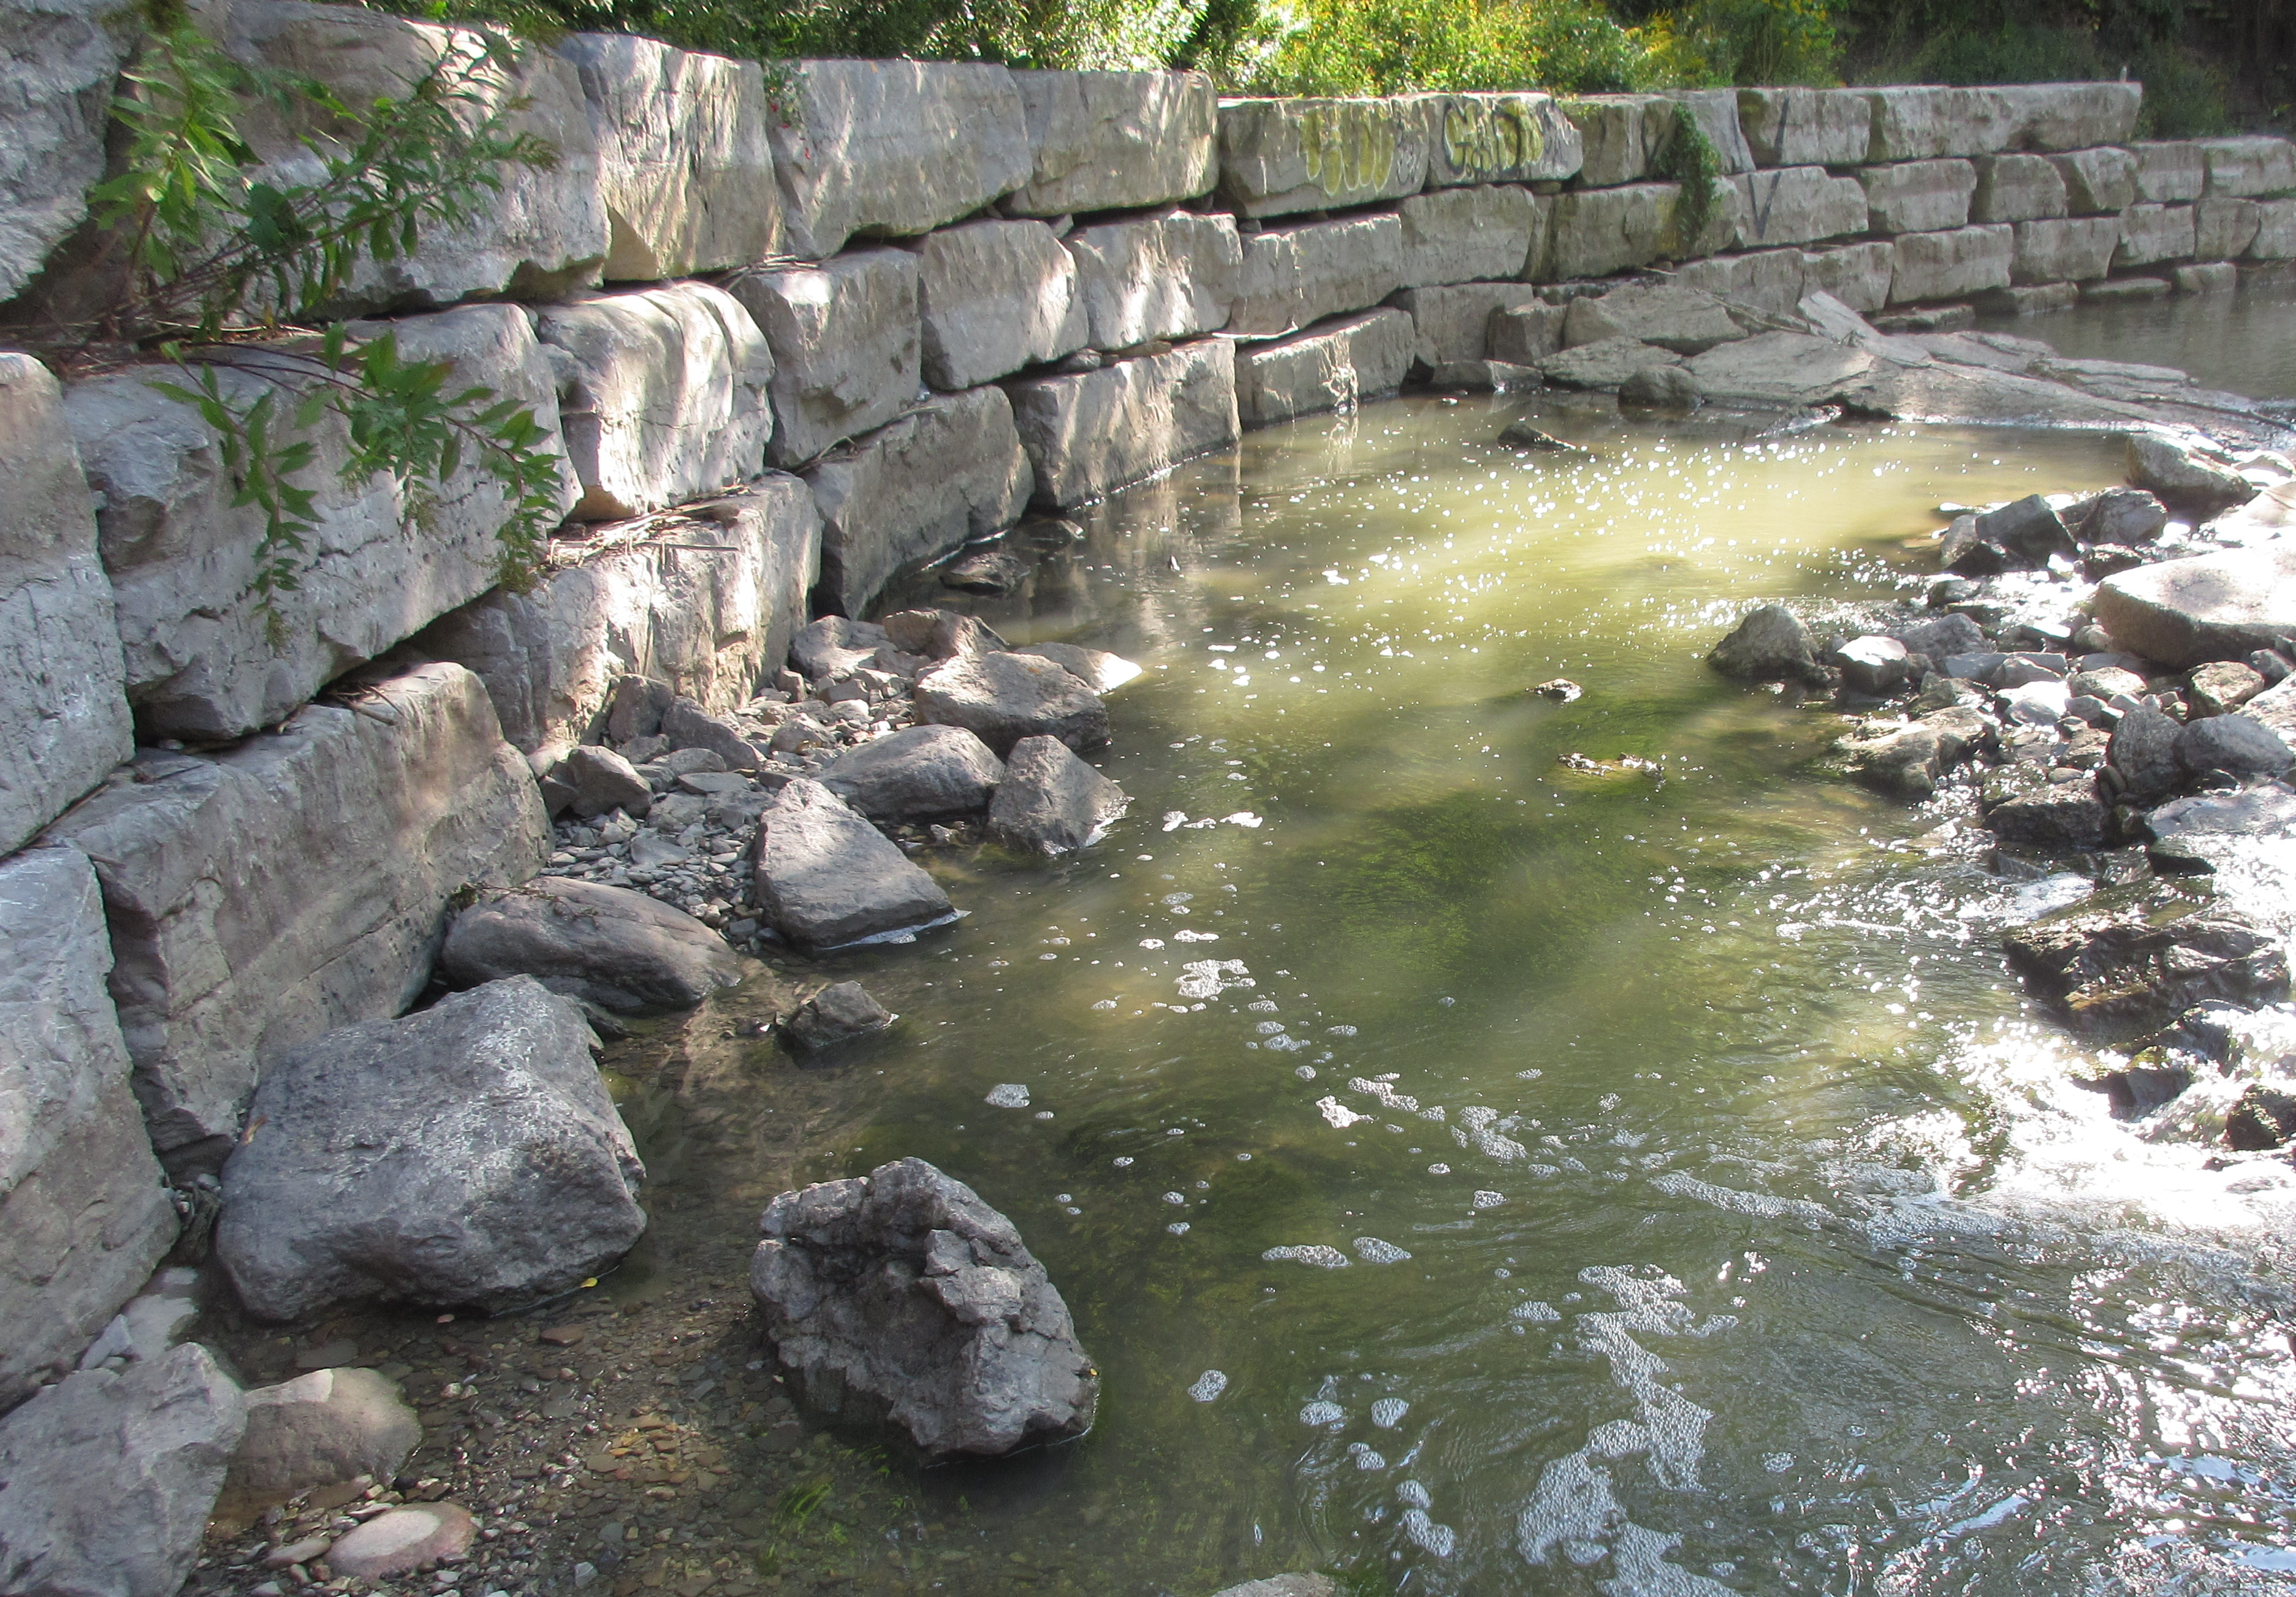 An armourstone wall on the edge of a creek bank